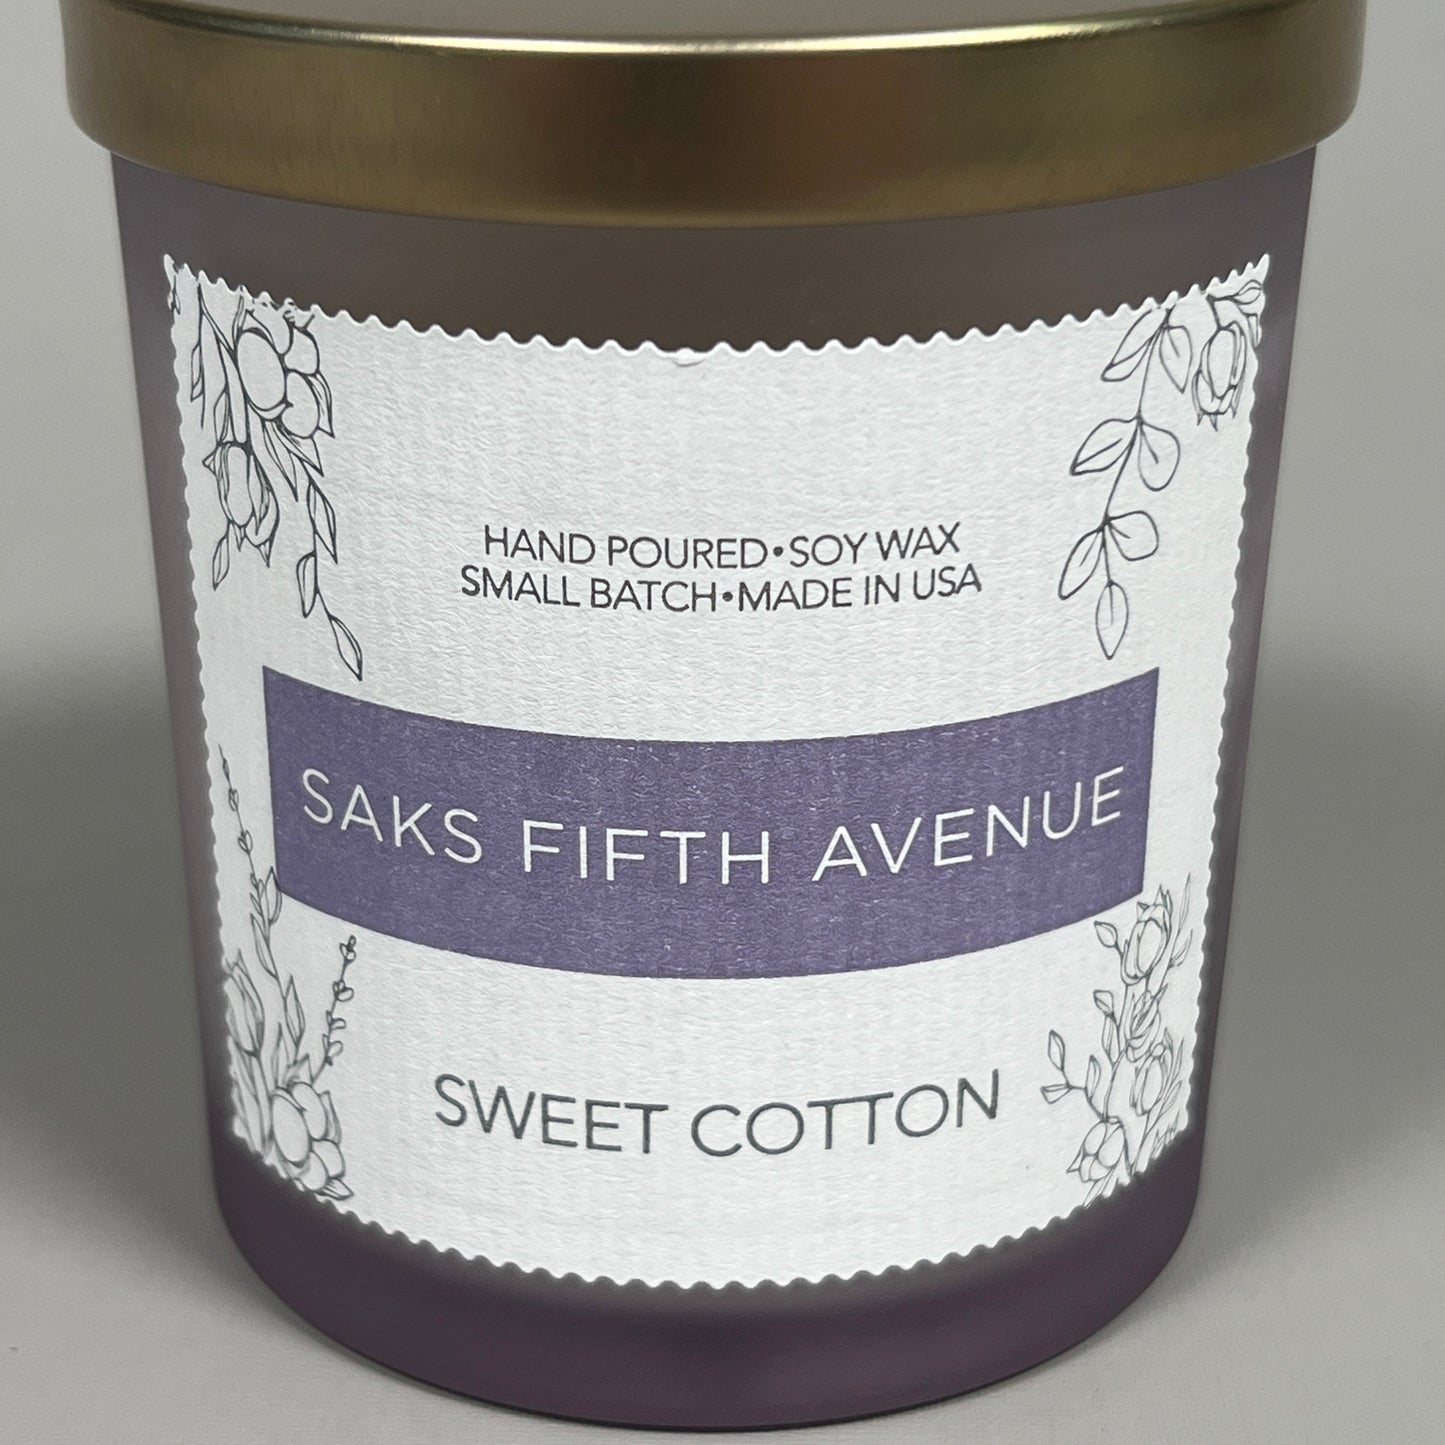 SAKS FIFTH AVENUE Sweet Cotton Hand Poured Soy Wax Candle 8 fl oz LOT OF 4! (New)